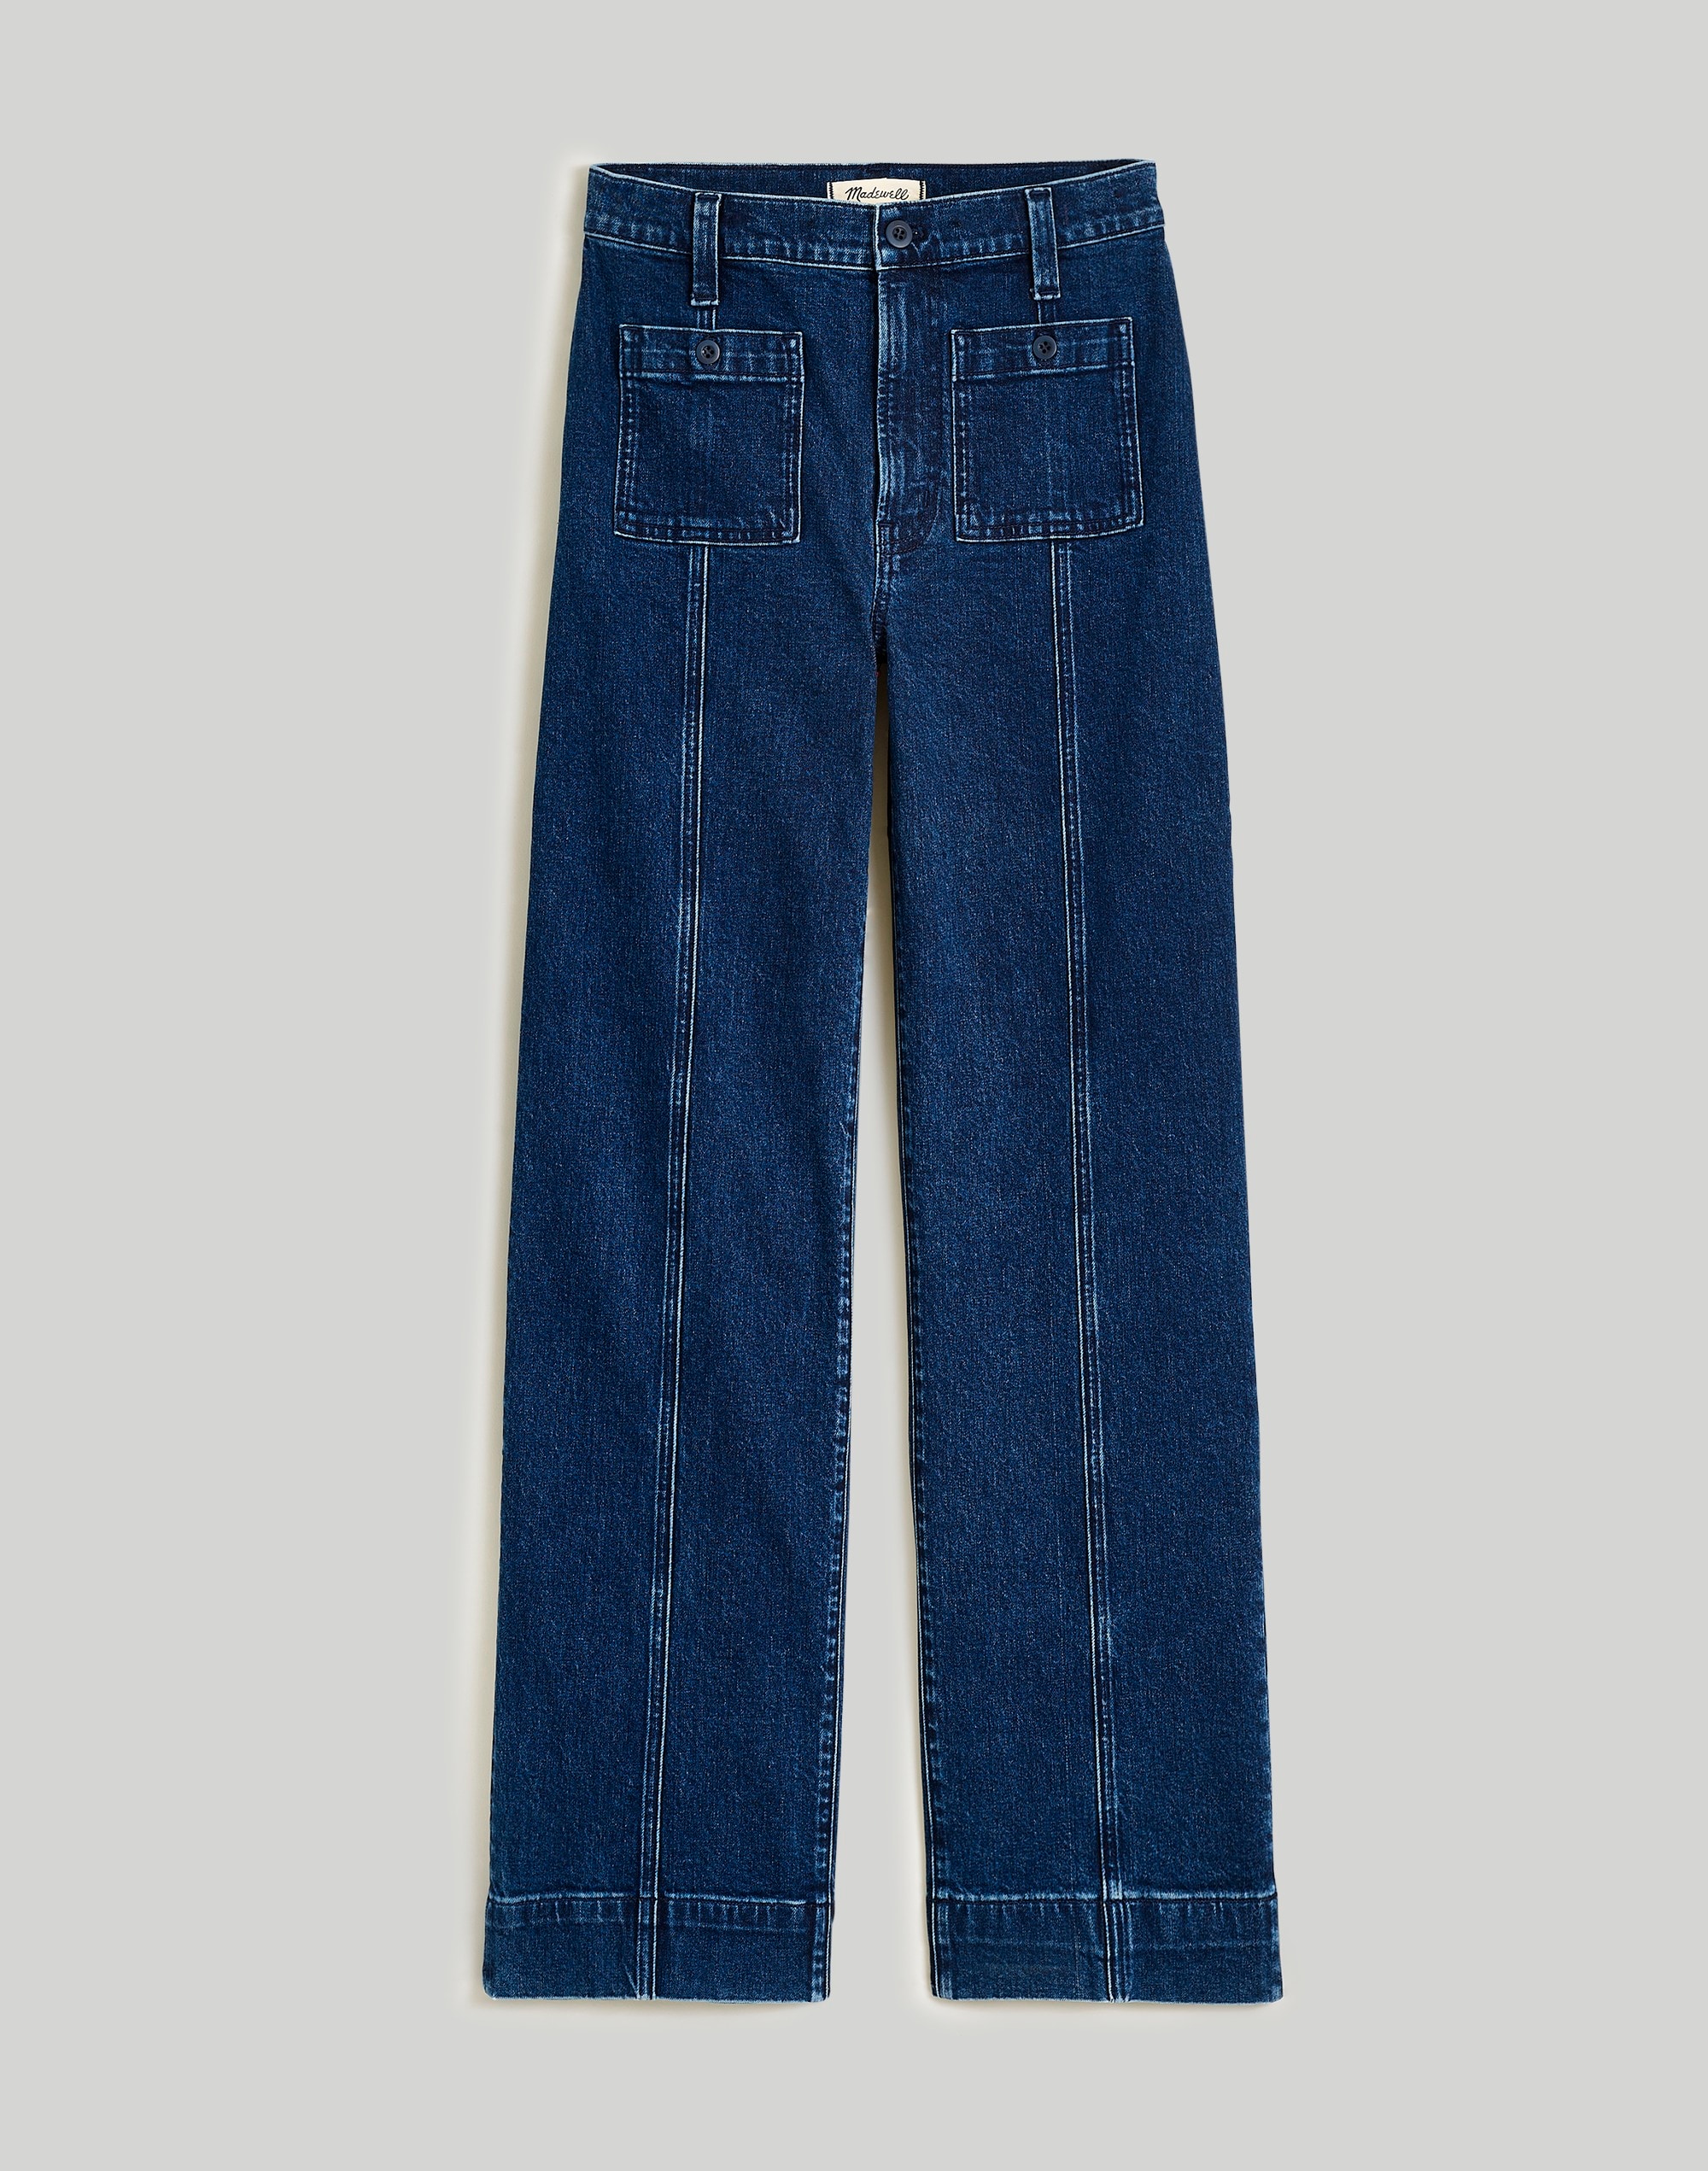 The Perfect Vintage Wide-Leg Jean Norden Wash: Patch-Pocket Edition